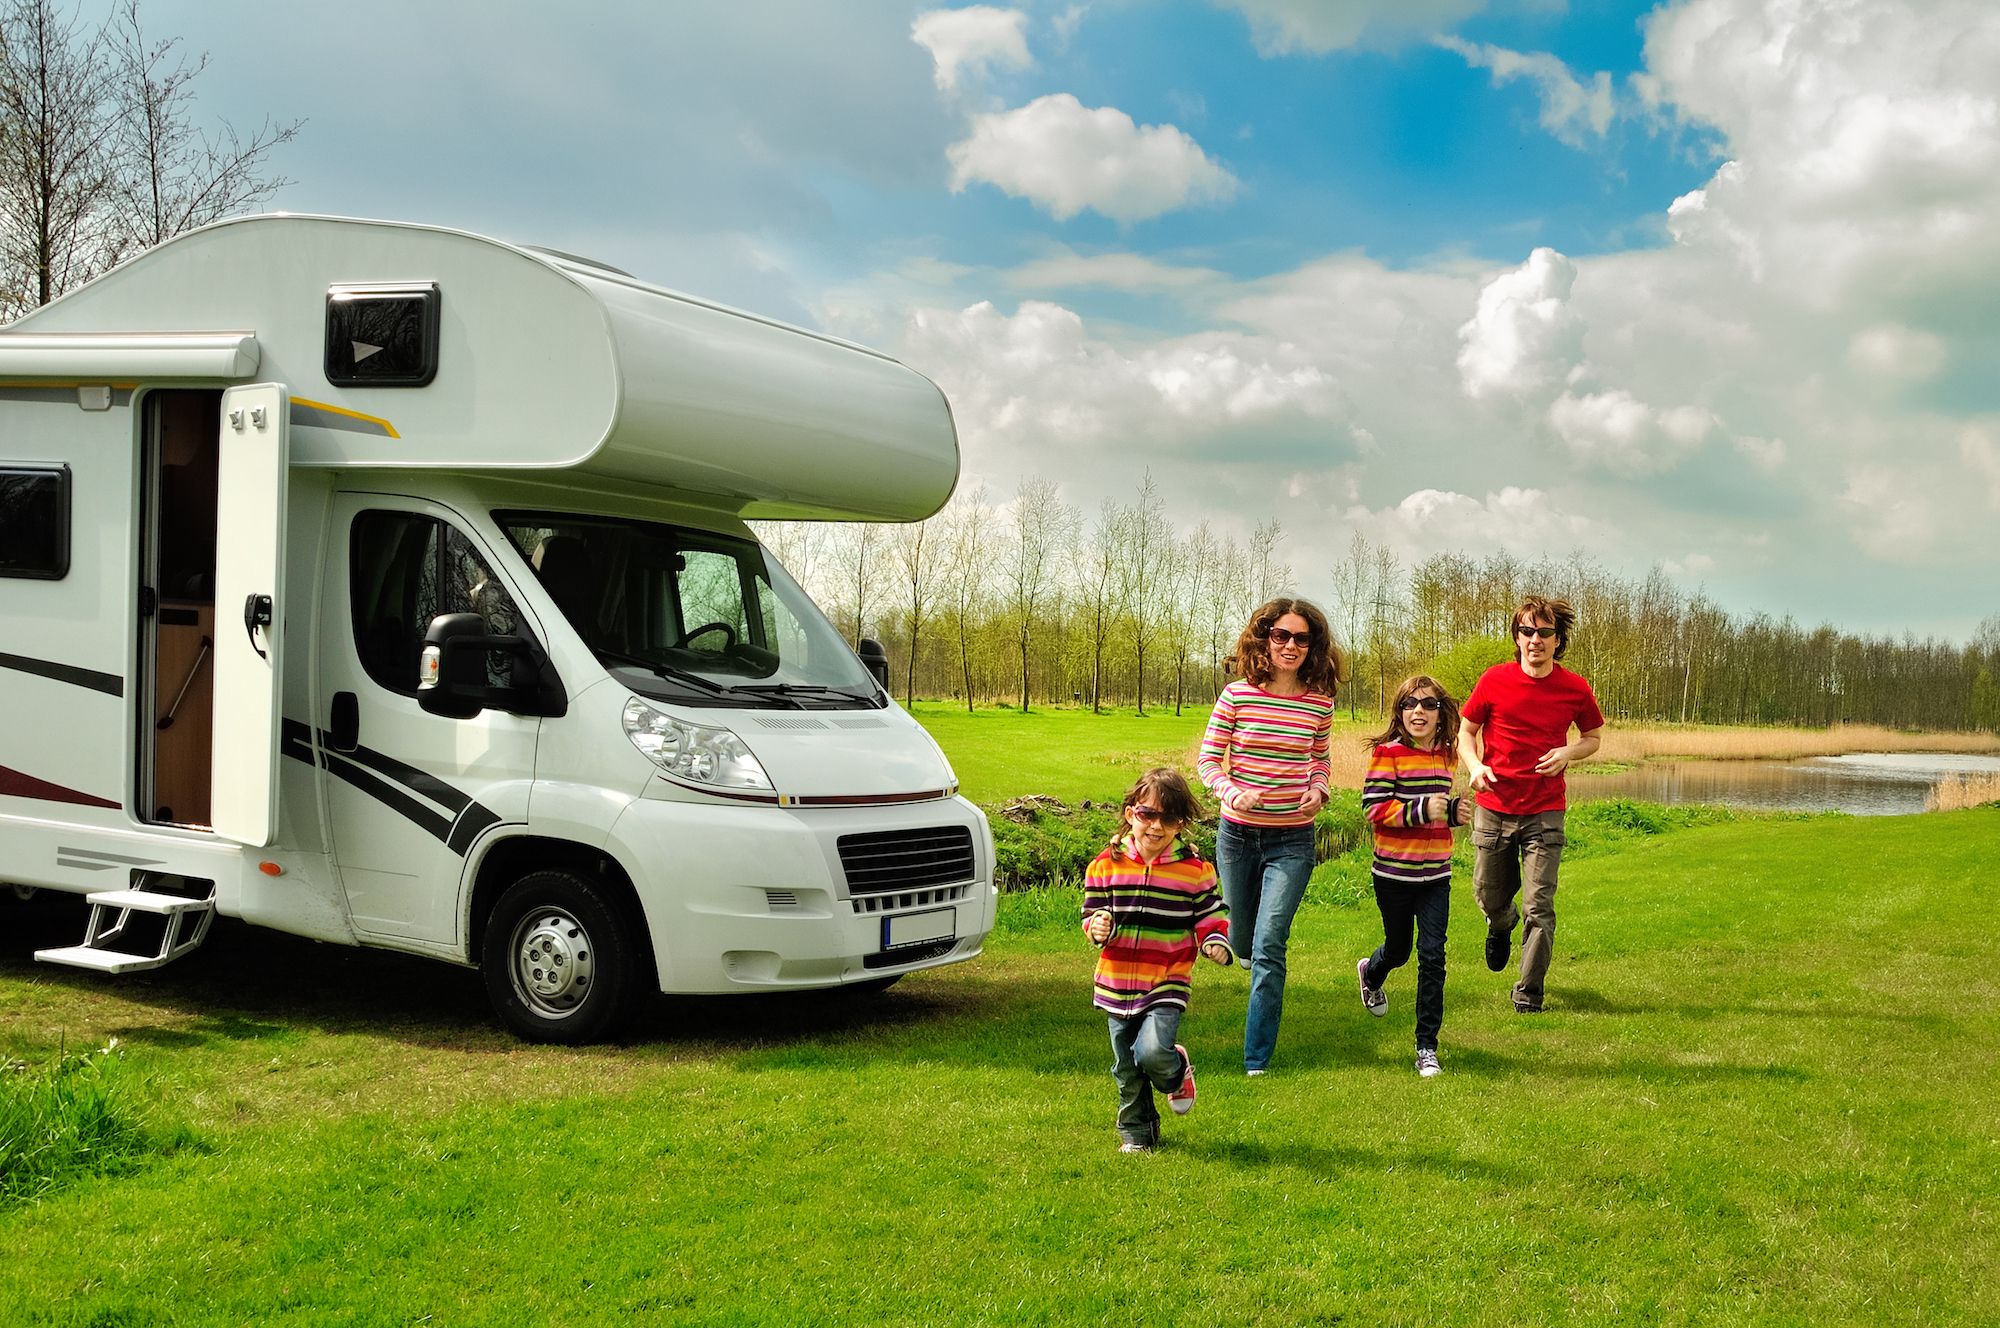 family-vacation-rv-travel-with-kids-happy-parents-with-children-have-fun-on-holiday-trip-in-motorhome.jpg